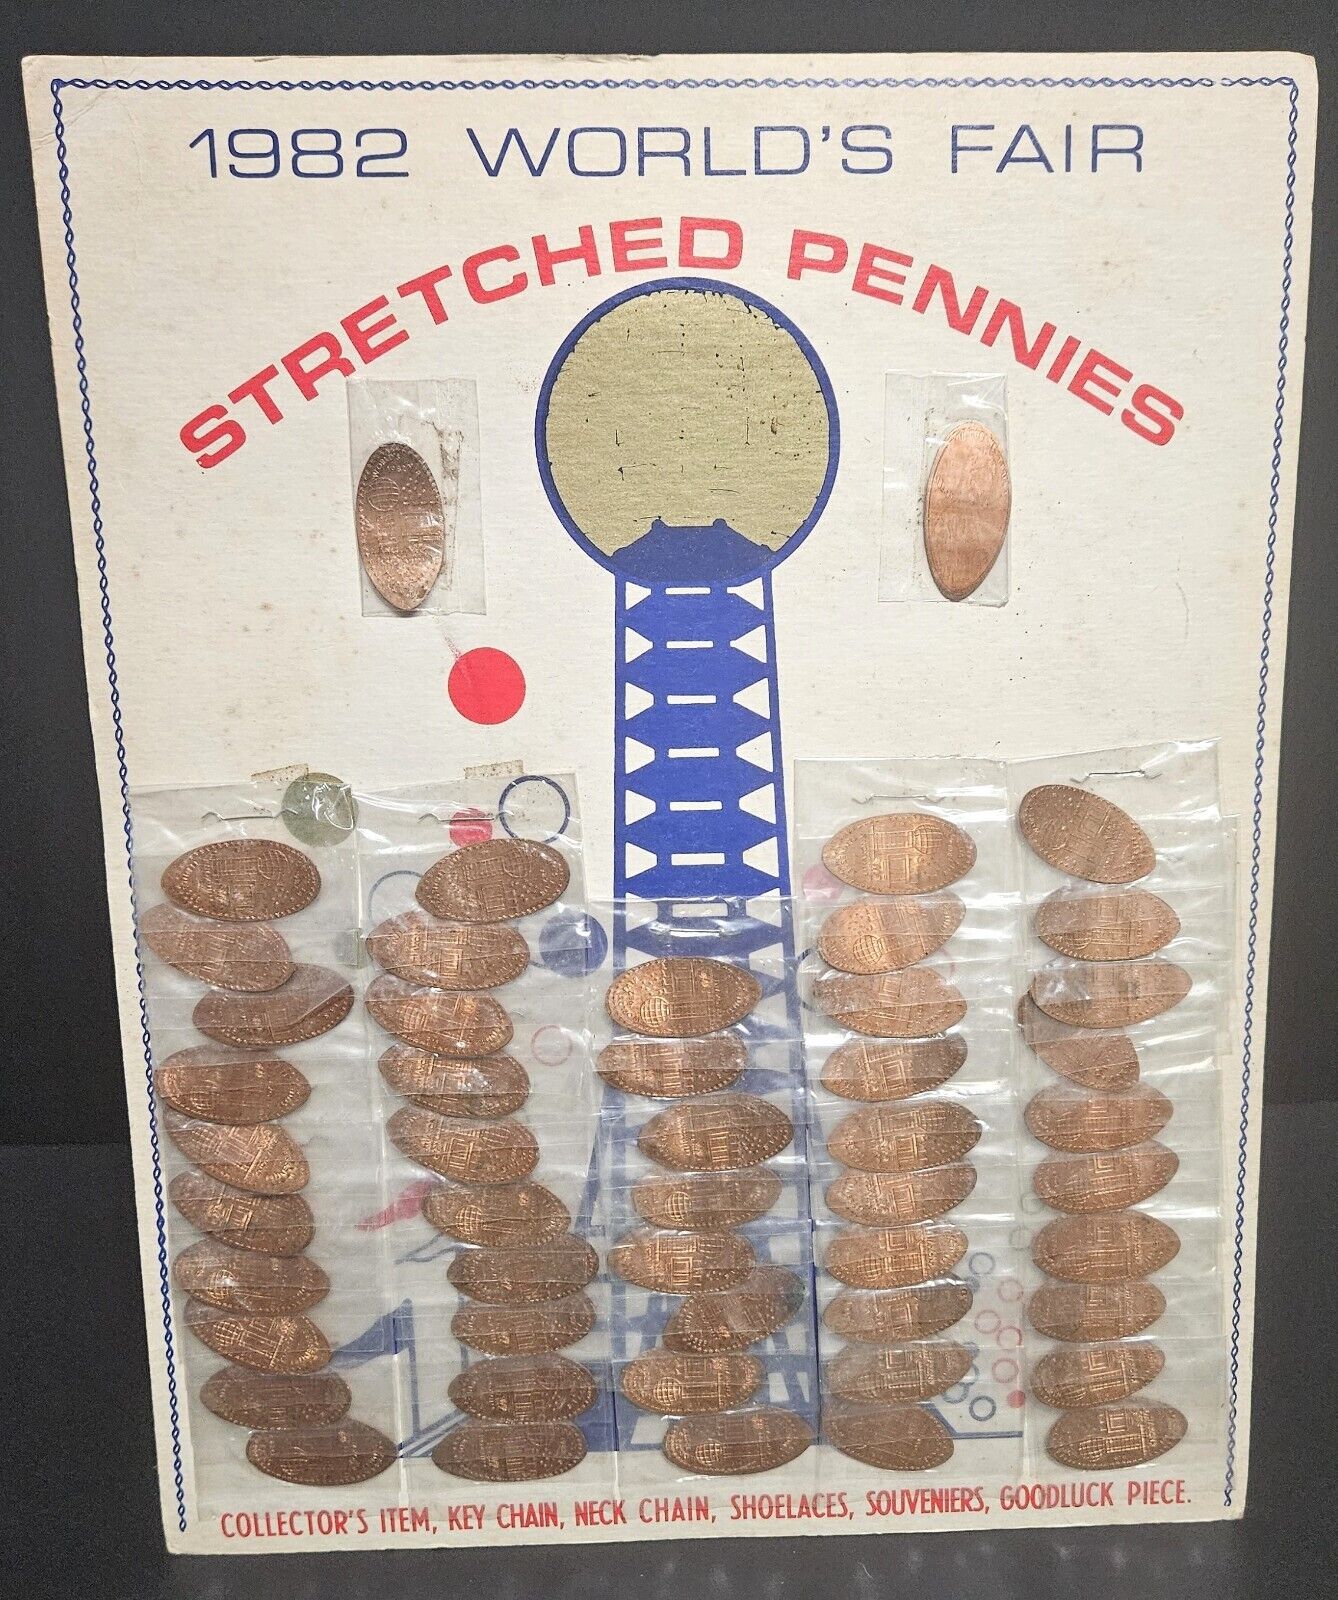 Vintage RARE 1982 World's Fair pressed Penny Display, Own a Piece Of History